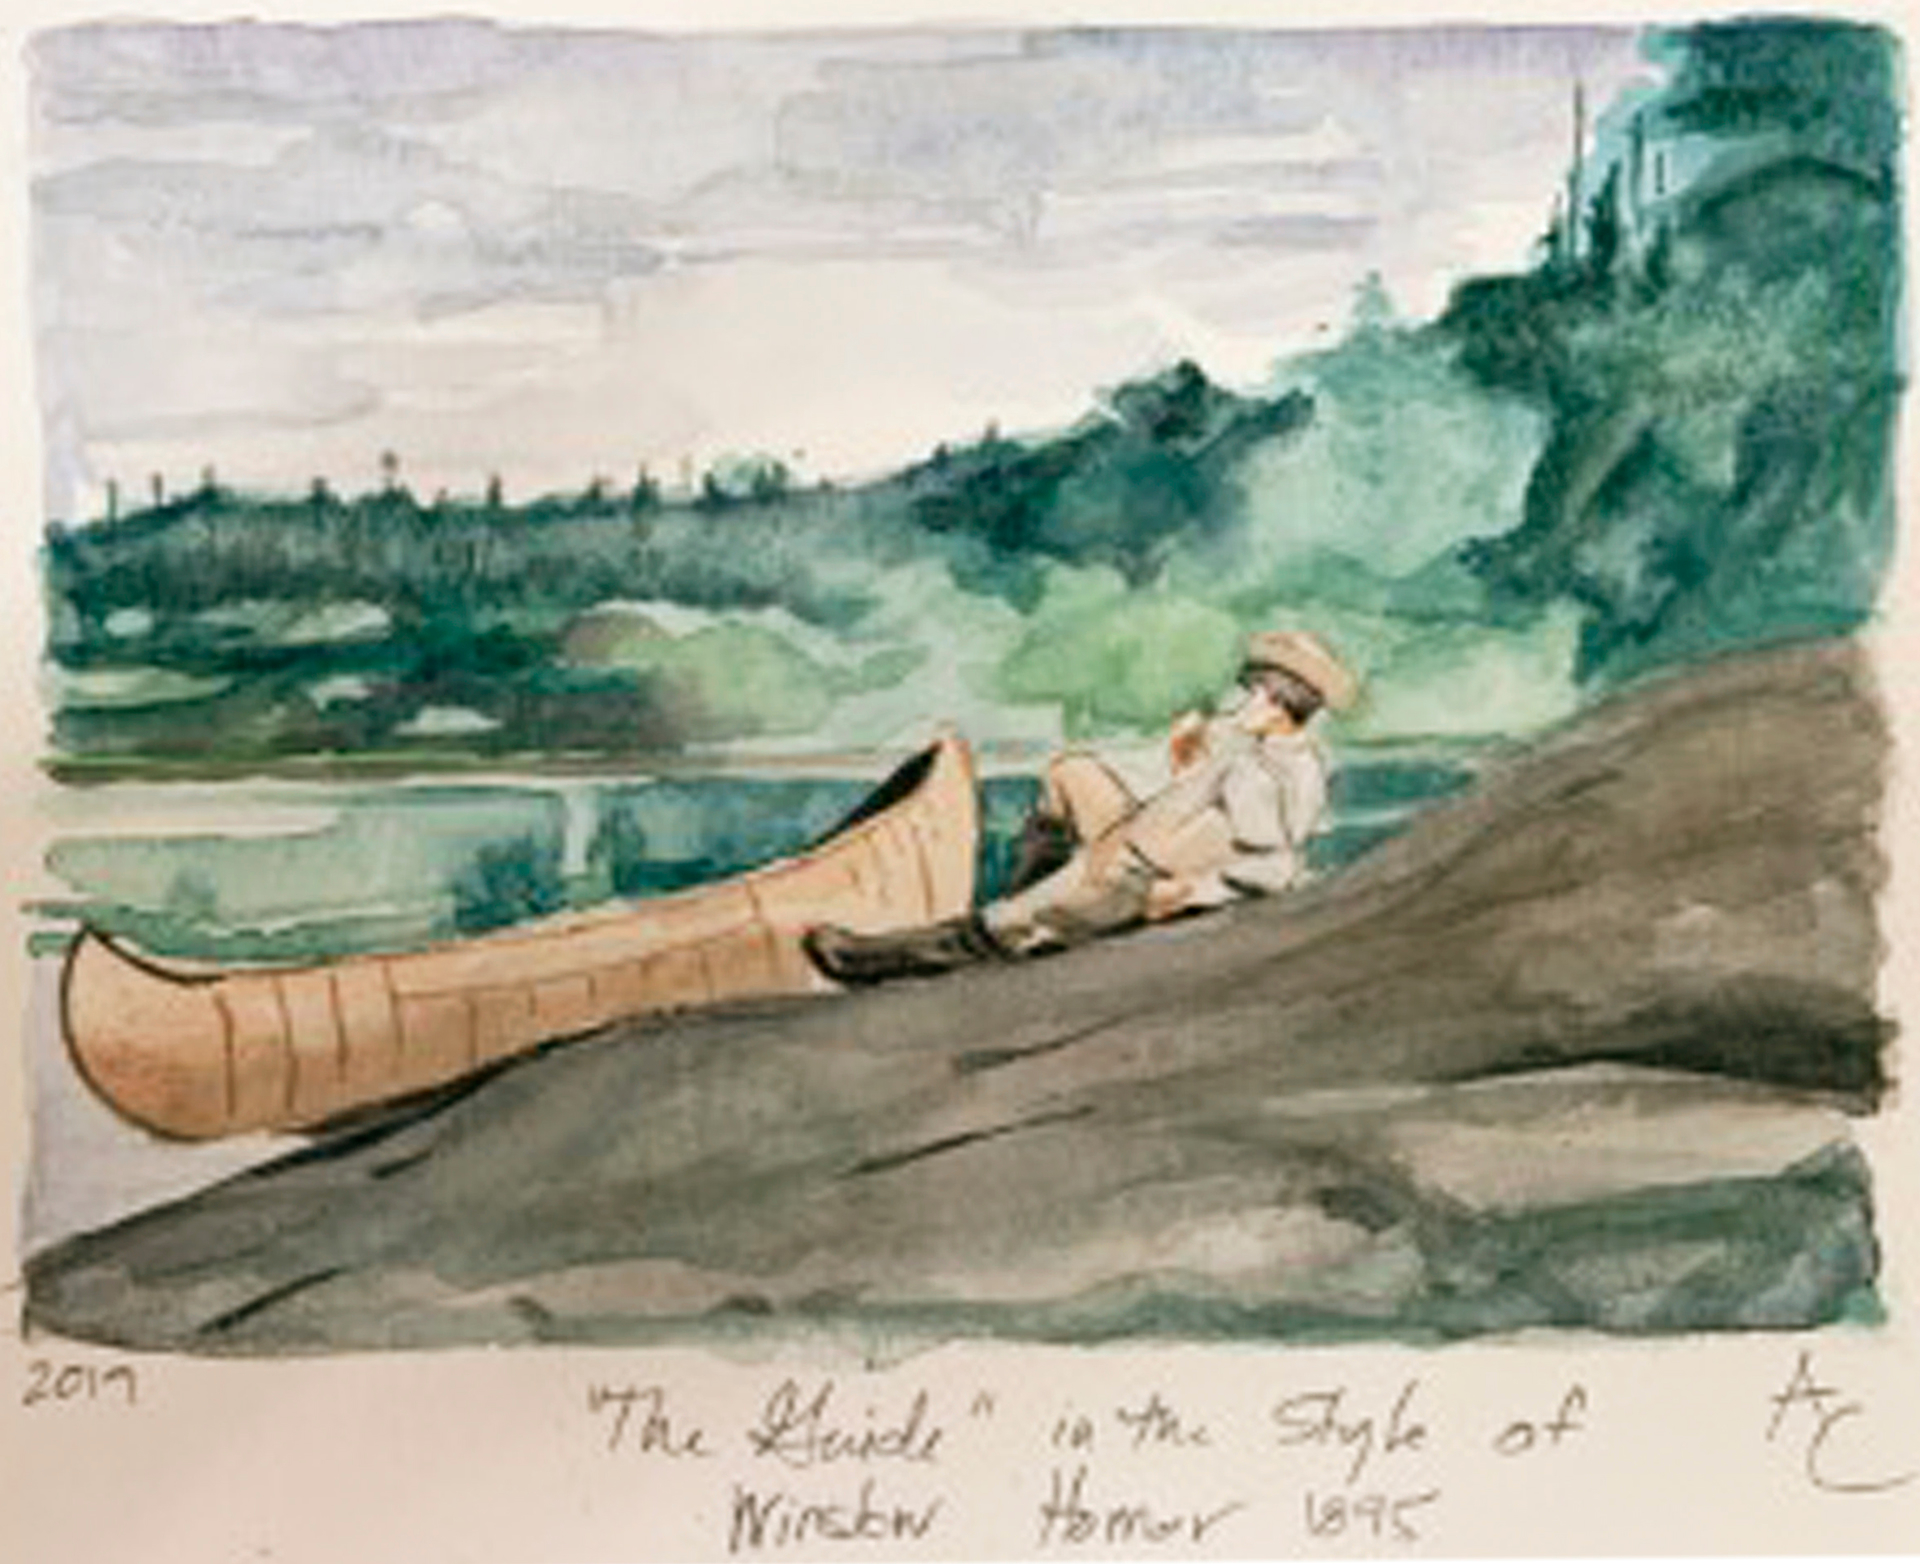 'The Guide' - in the style of Winslow Homer 1895 study by Allison Charles